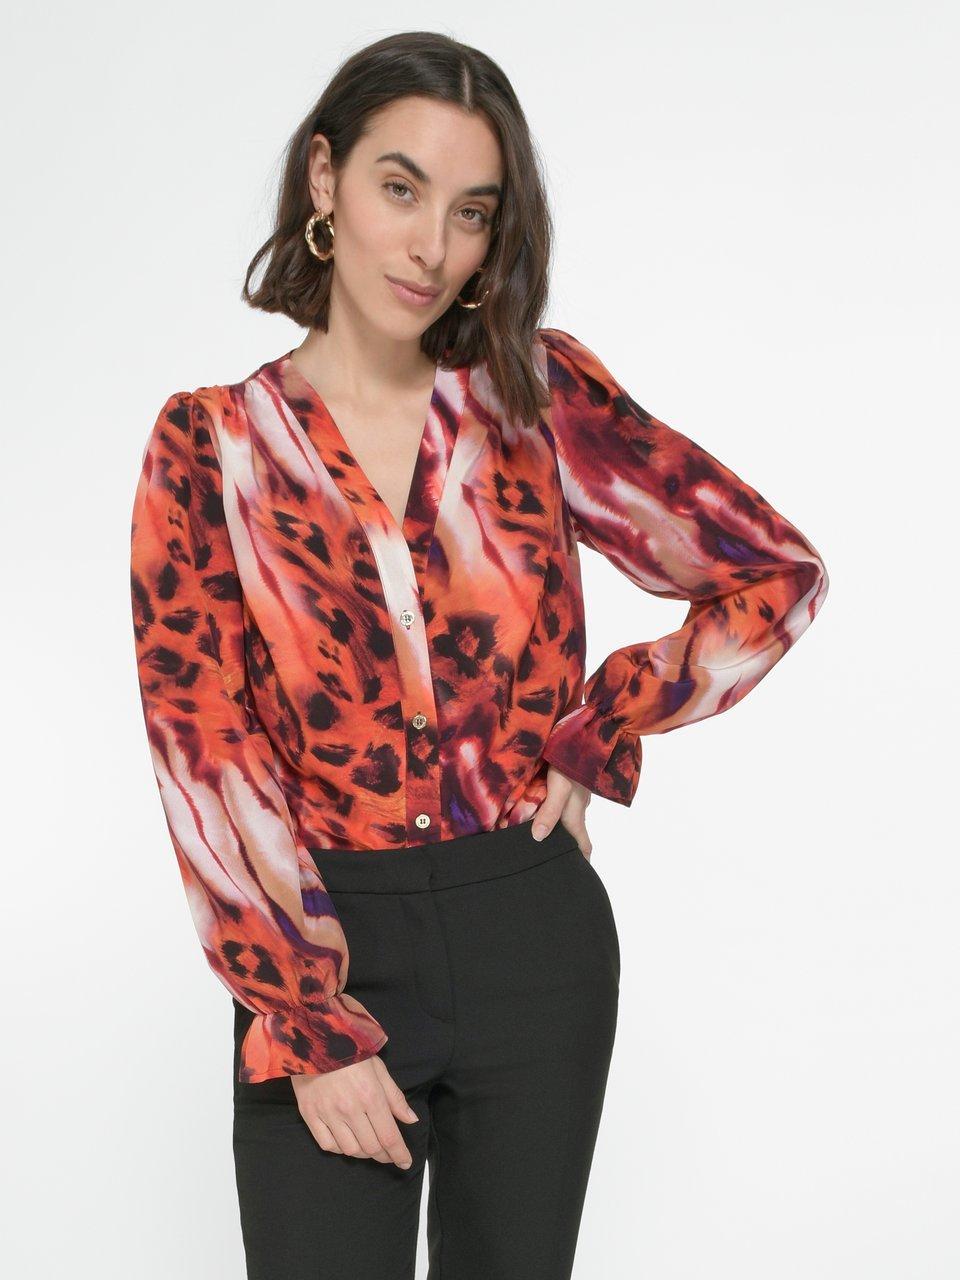 films Ga lekker liggen Albany MARCIANO by Guess - Blouse - rood/multicolour